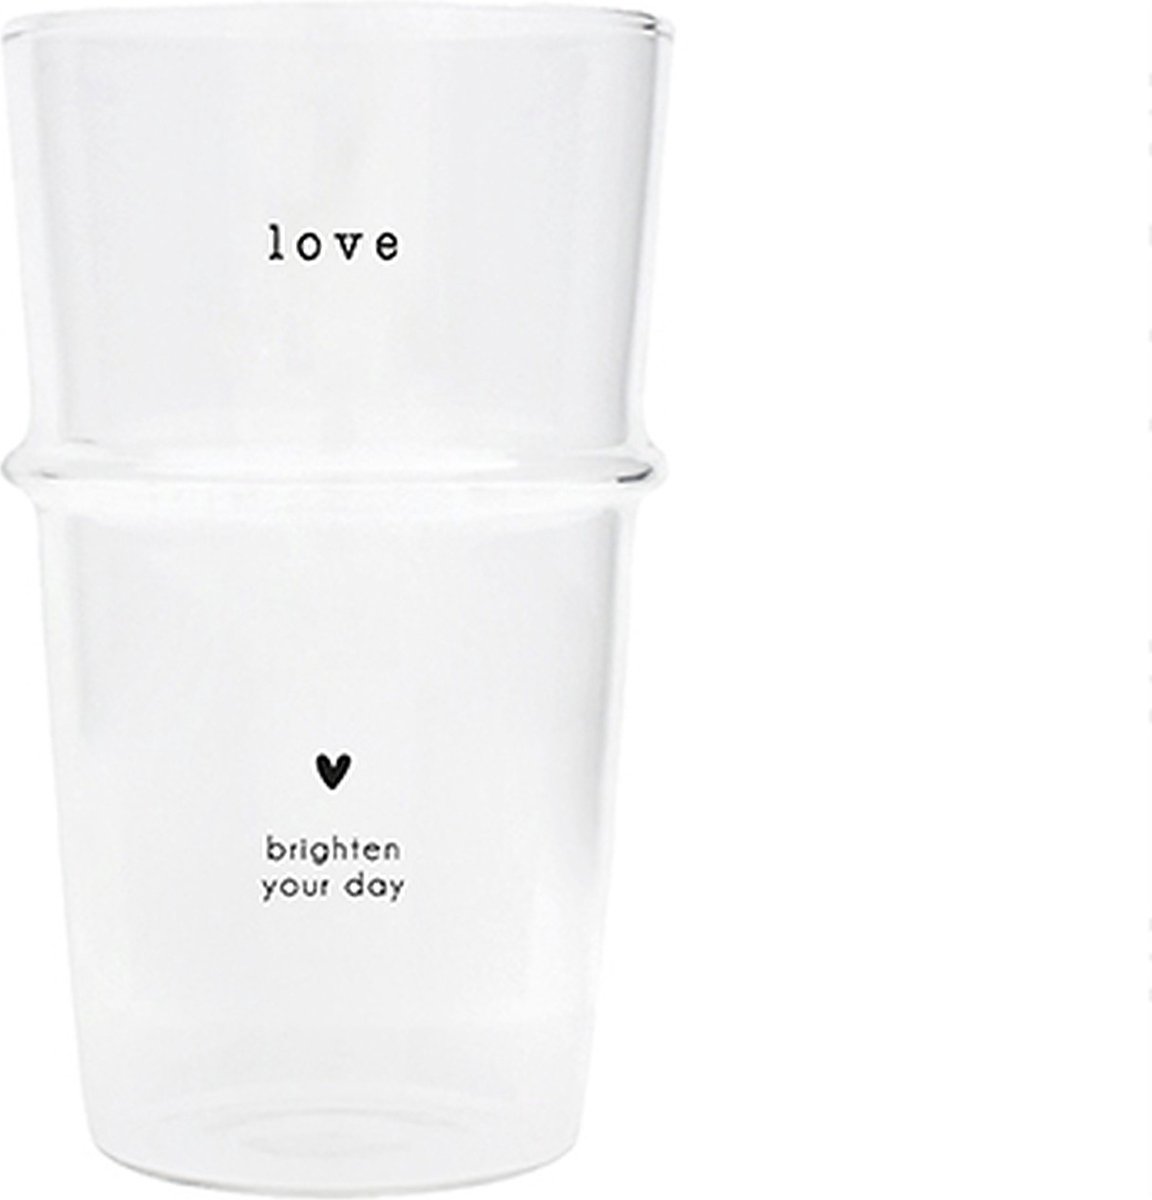 Bastion Collections - Latte Glas - Love, brighten your day